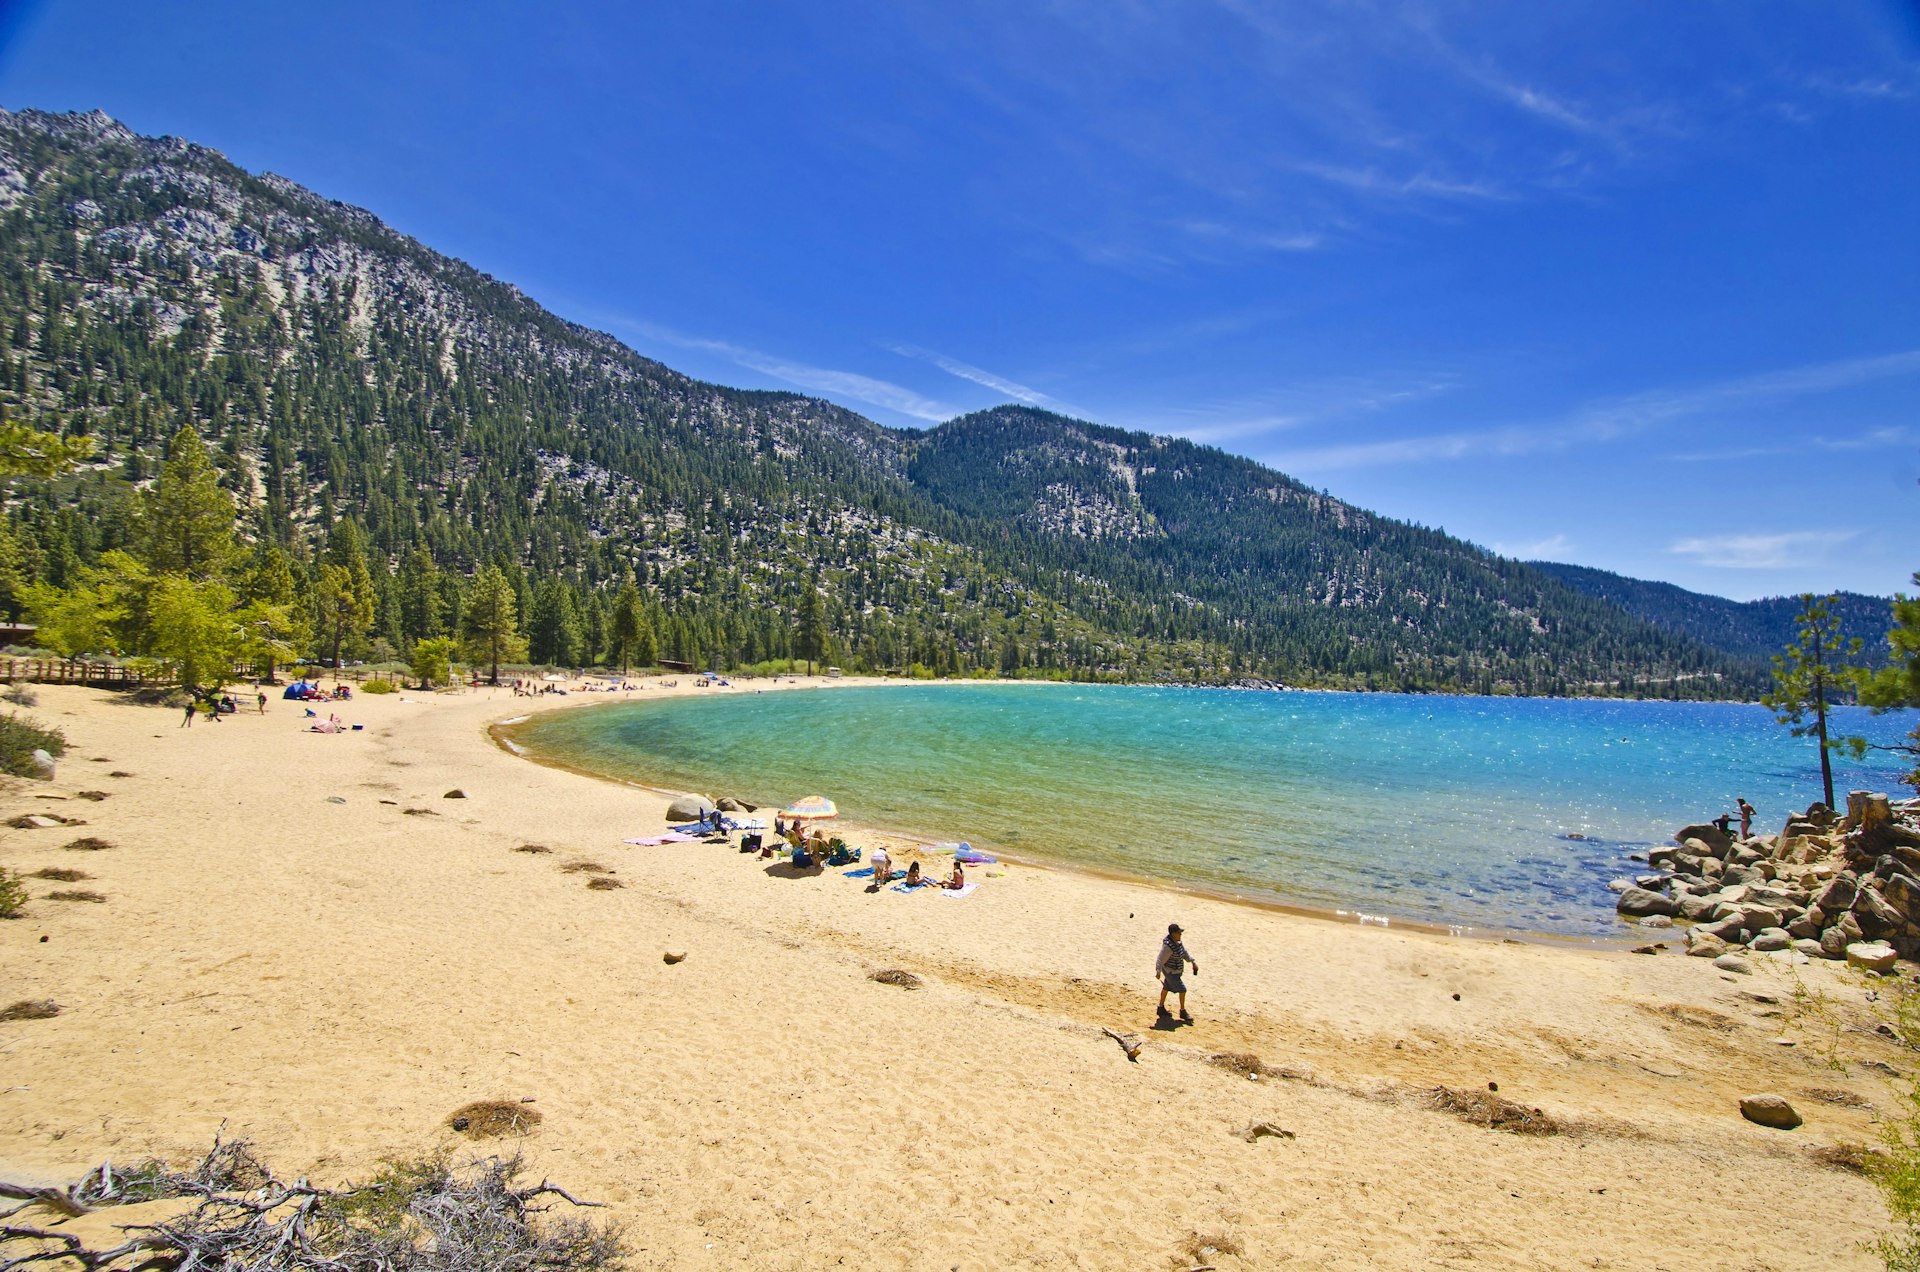 People on the beach at Sand Harbor State Park, Lake Tahoe, Nevada, USA